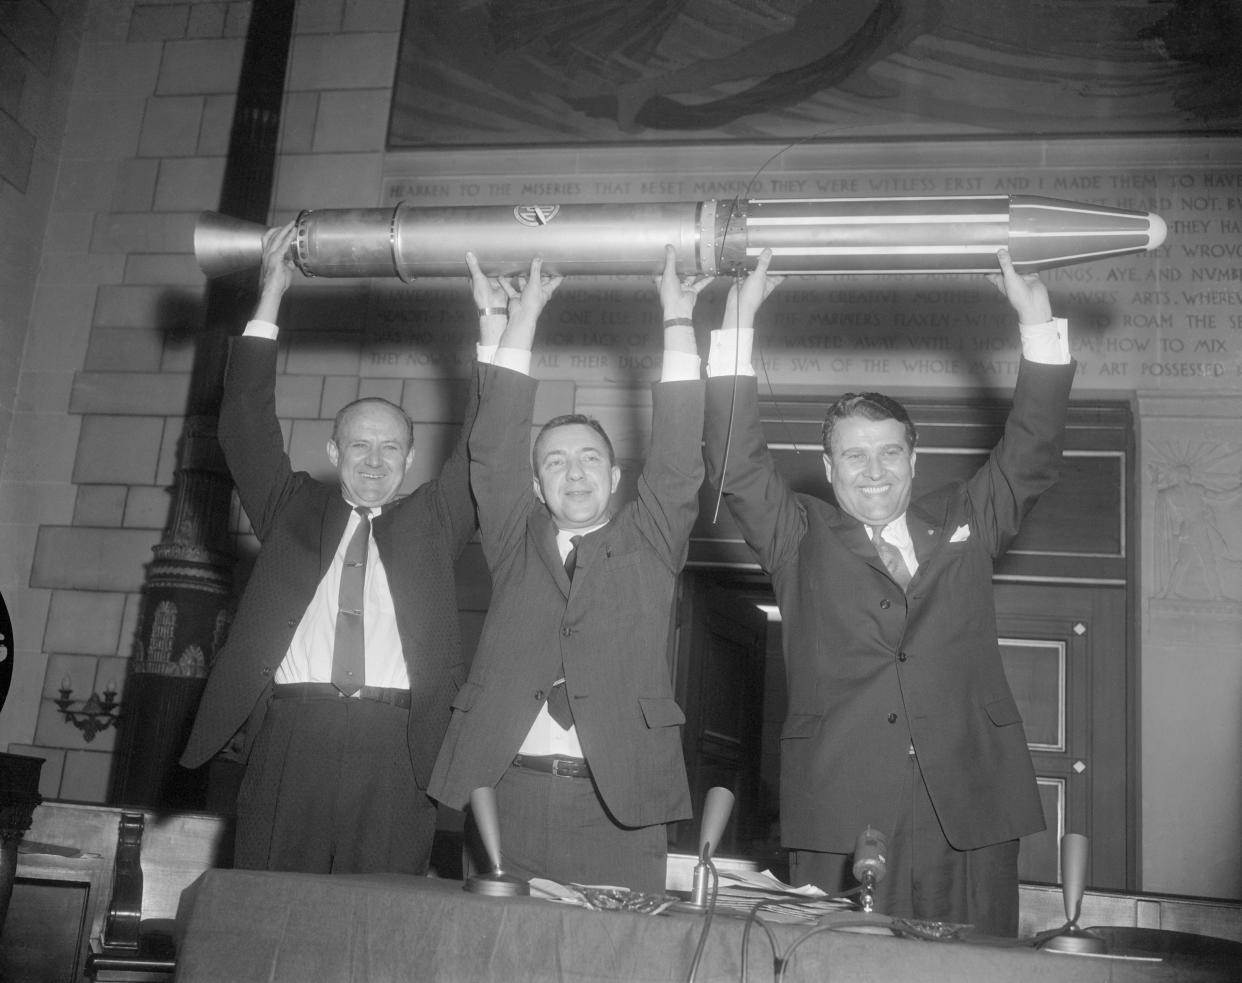 (Original Caption) Washington DC: 2/1/1958- Scientists who participated in the program celebrate the successful launching of the first U.S. satellite at the National Academy of Science. They hold a model of the satellite called 